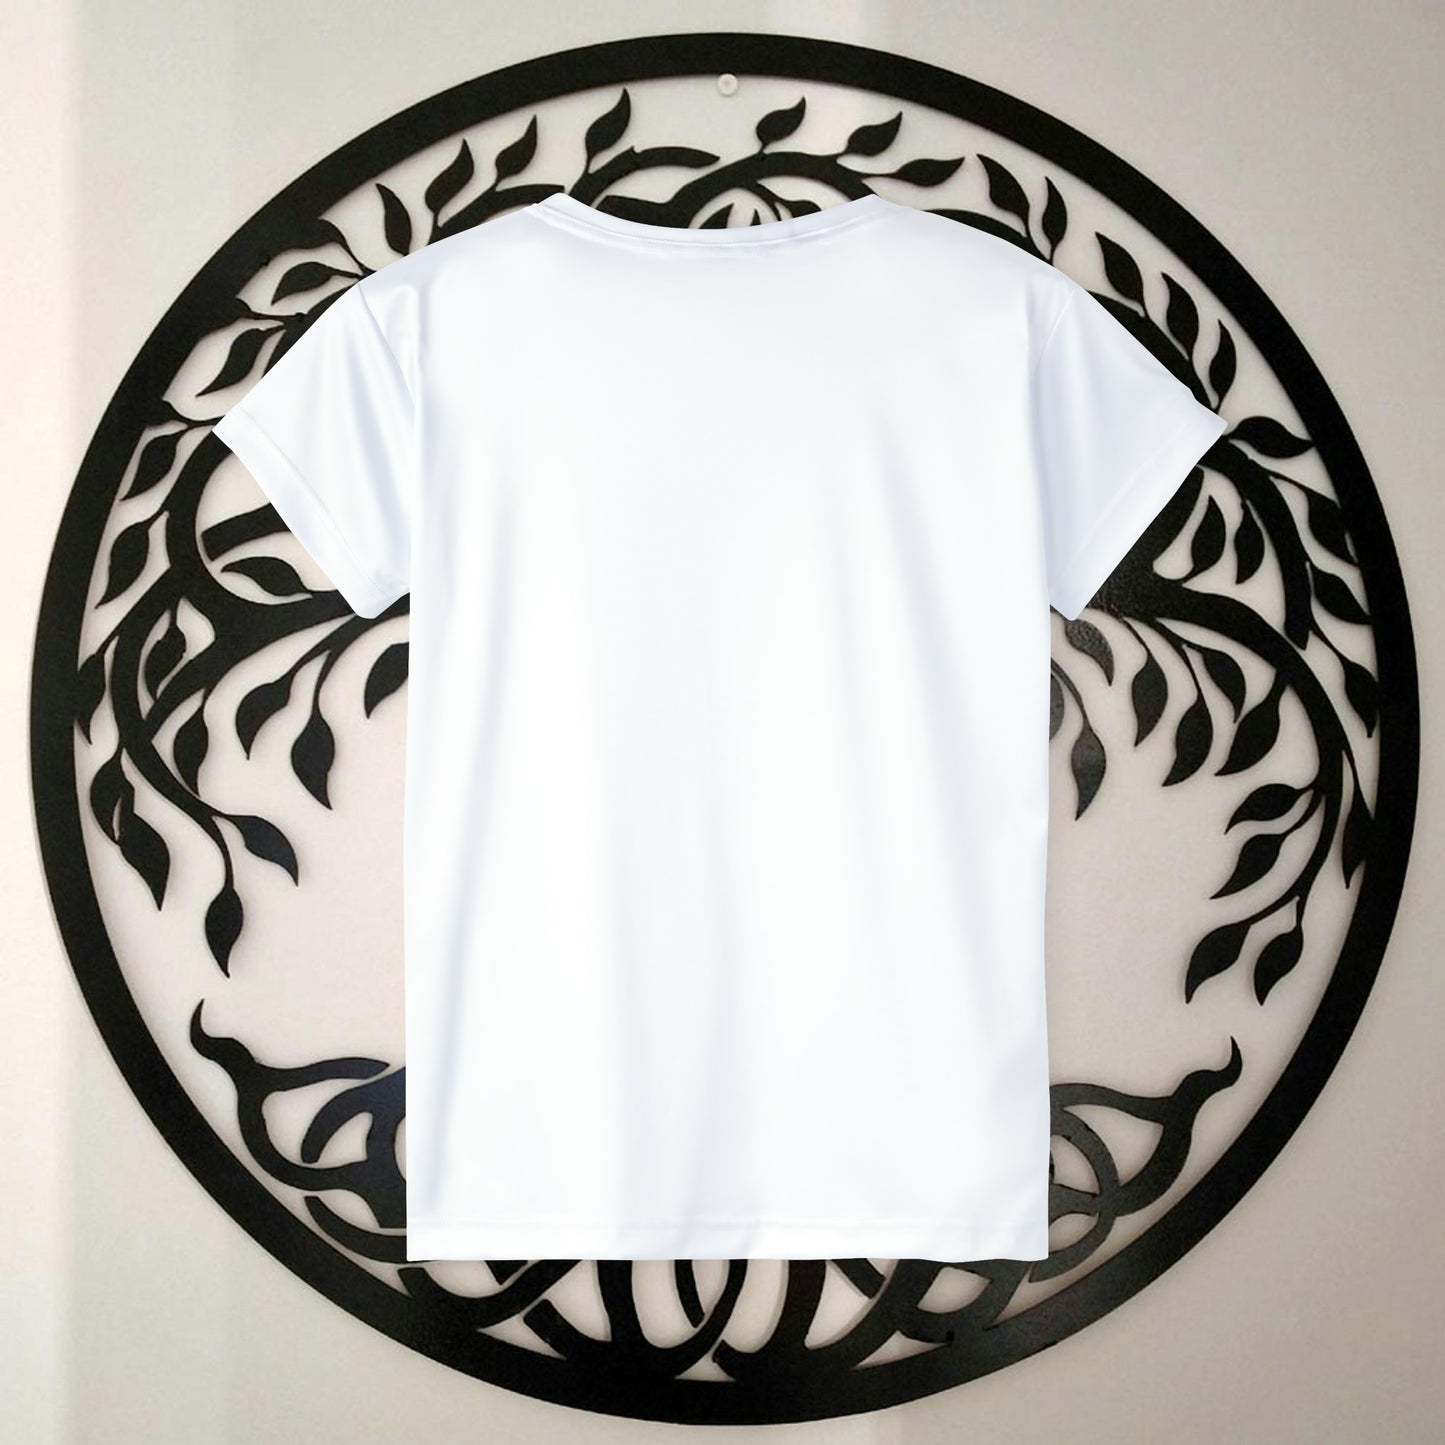 Righteous Meditation Women's Jersey - Find Your Zen (White)